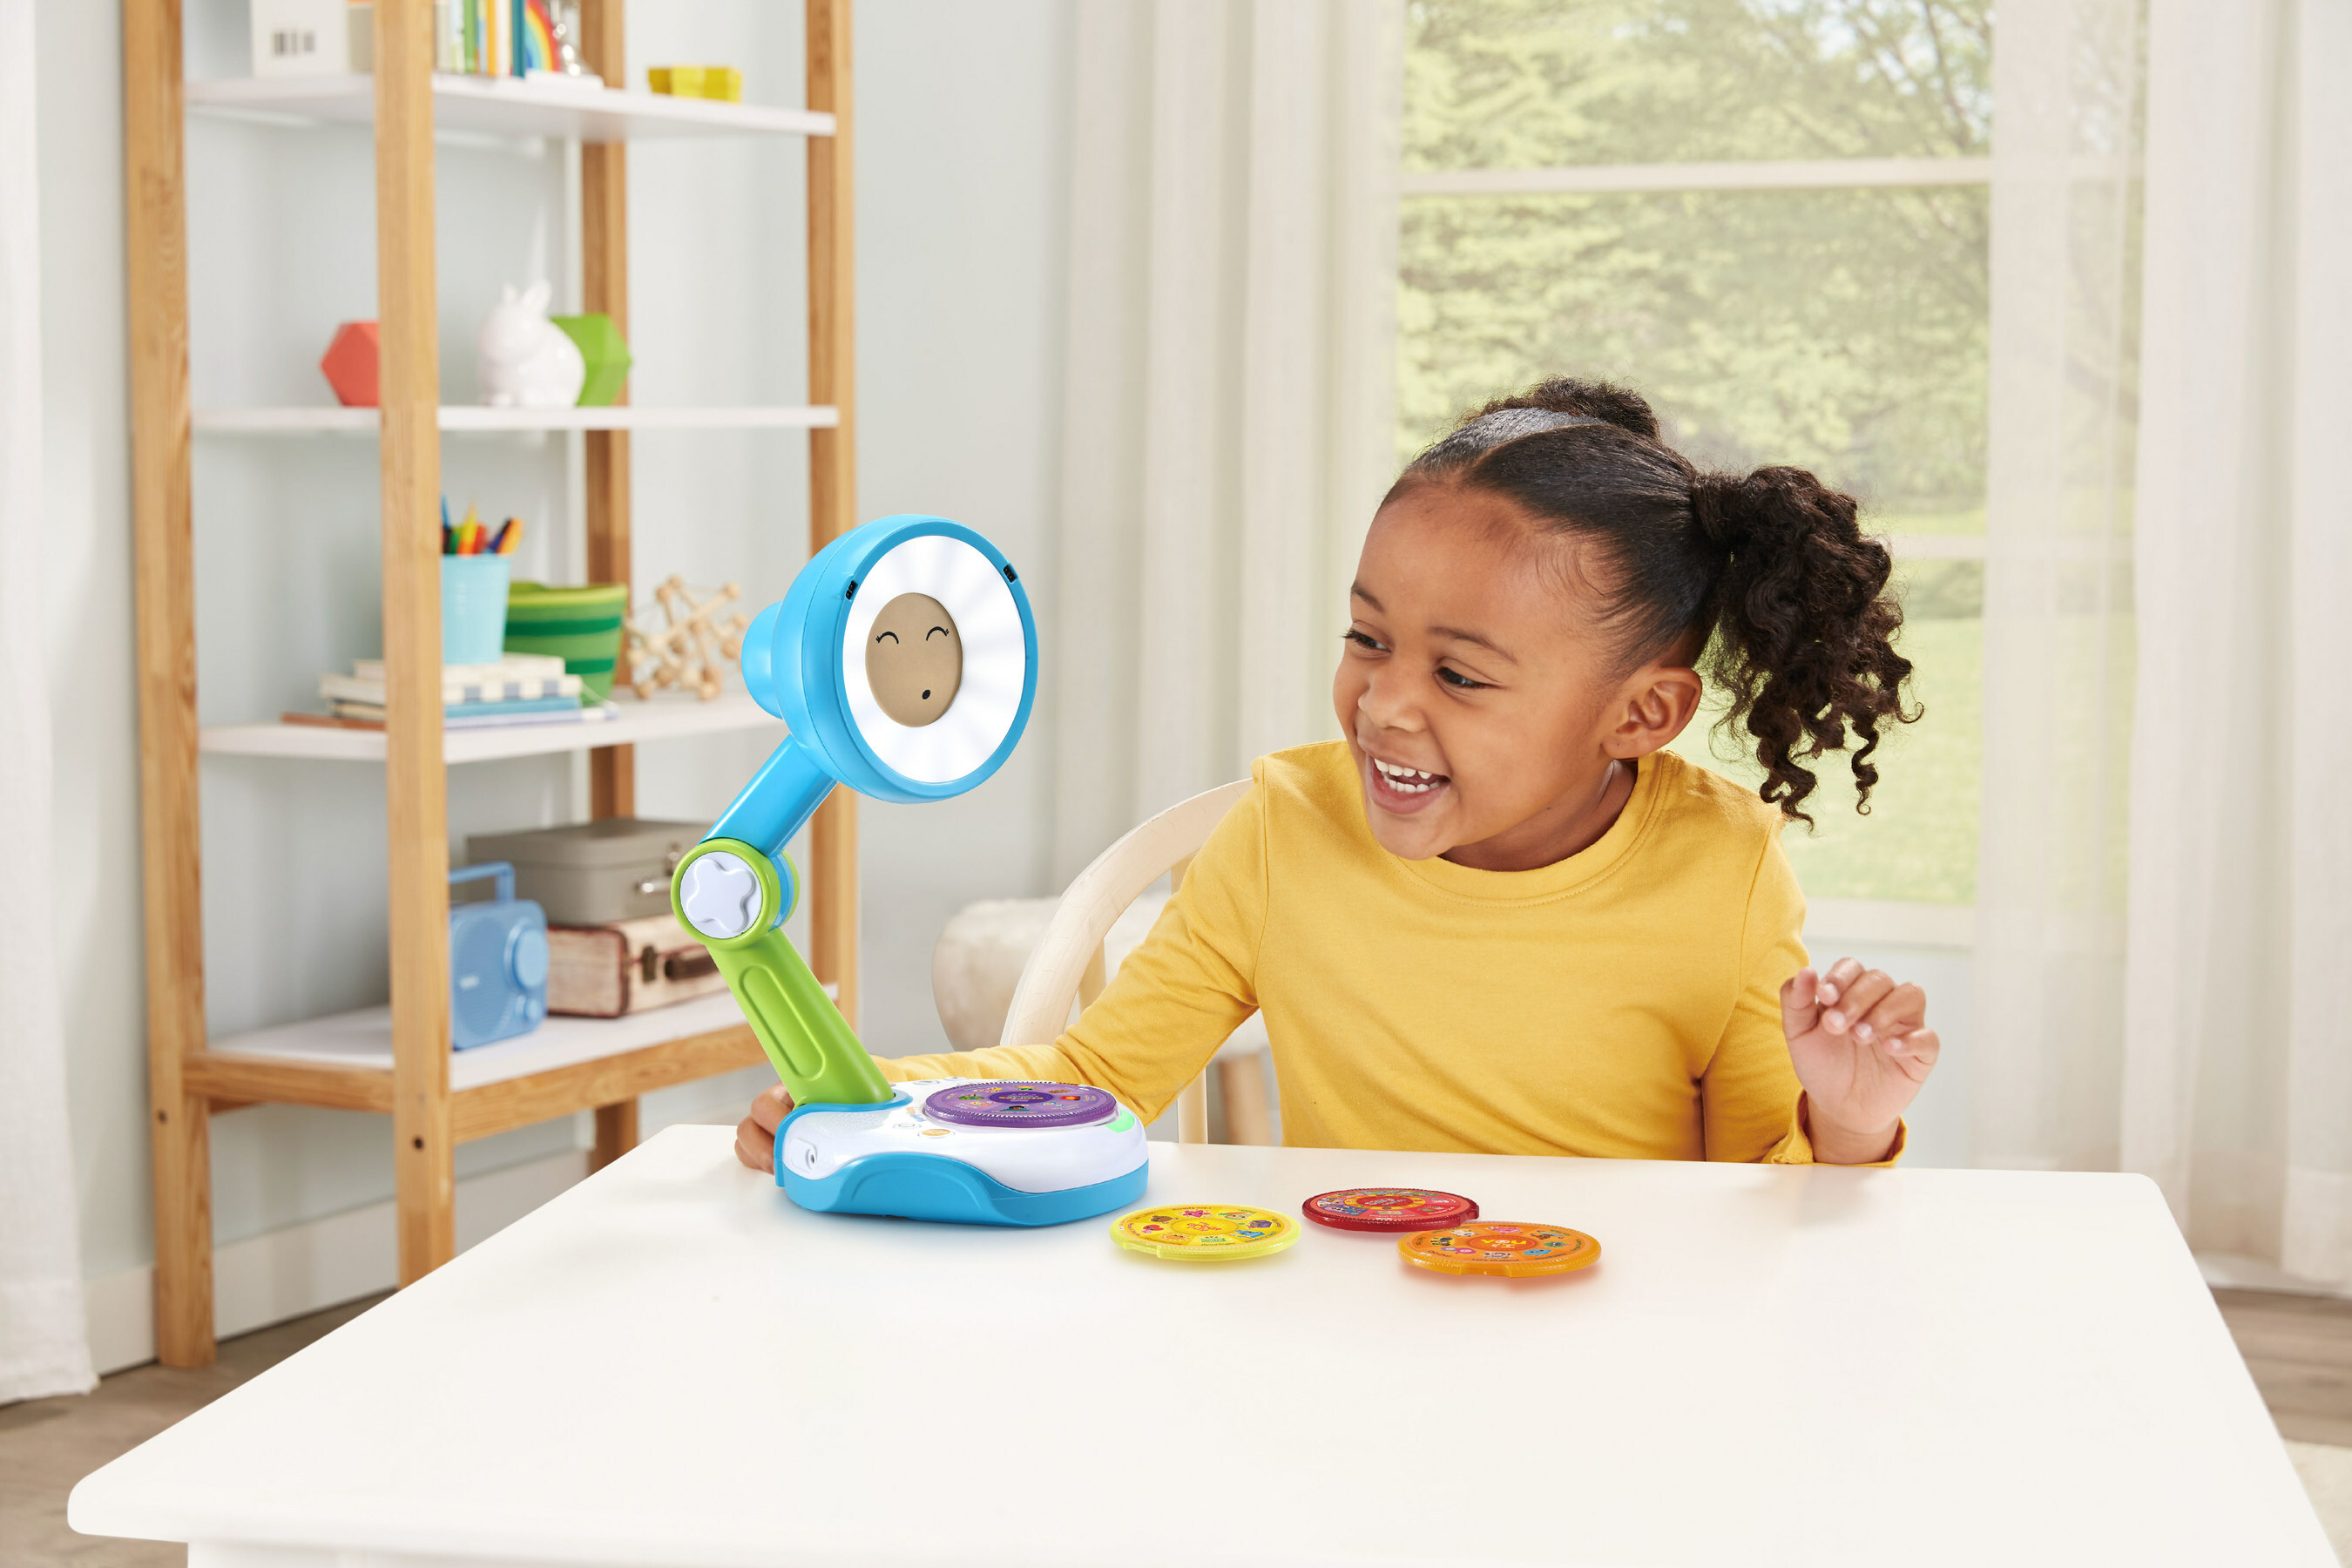 VTech Toys USA - Who wants a SNEAK PEAK at new VTech toys? 👀 We